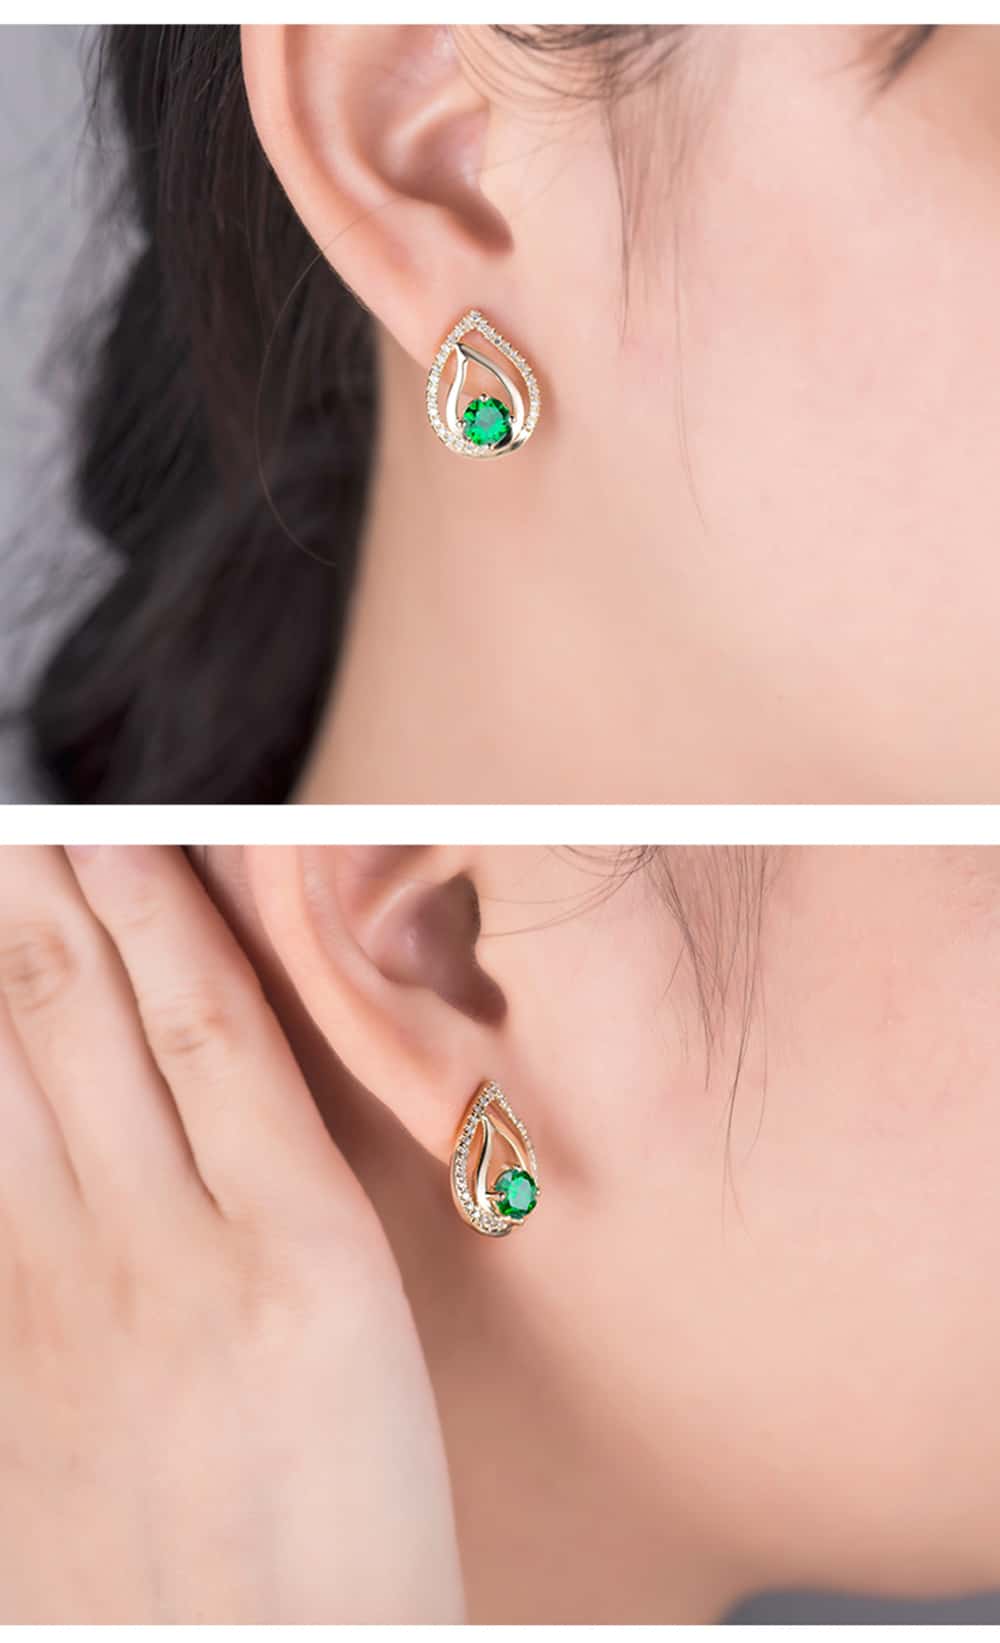 LOVERJEWELRY Lady Stud Earrings Real 18K Yellow Gold Natural Round Tsavorite Classic Earrings For Women Party Office Jewelry